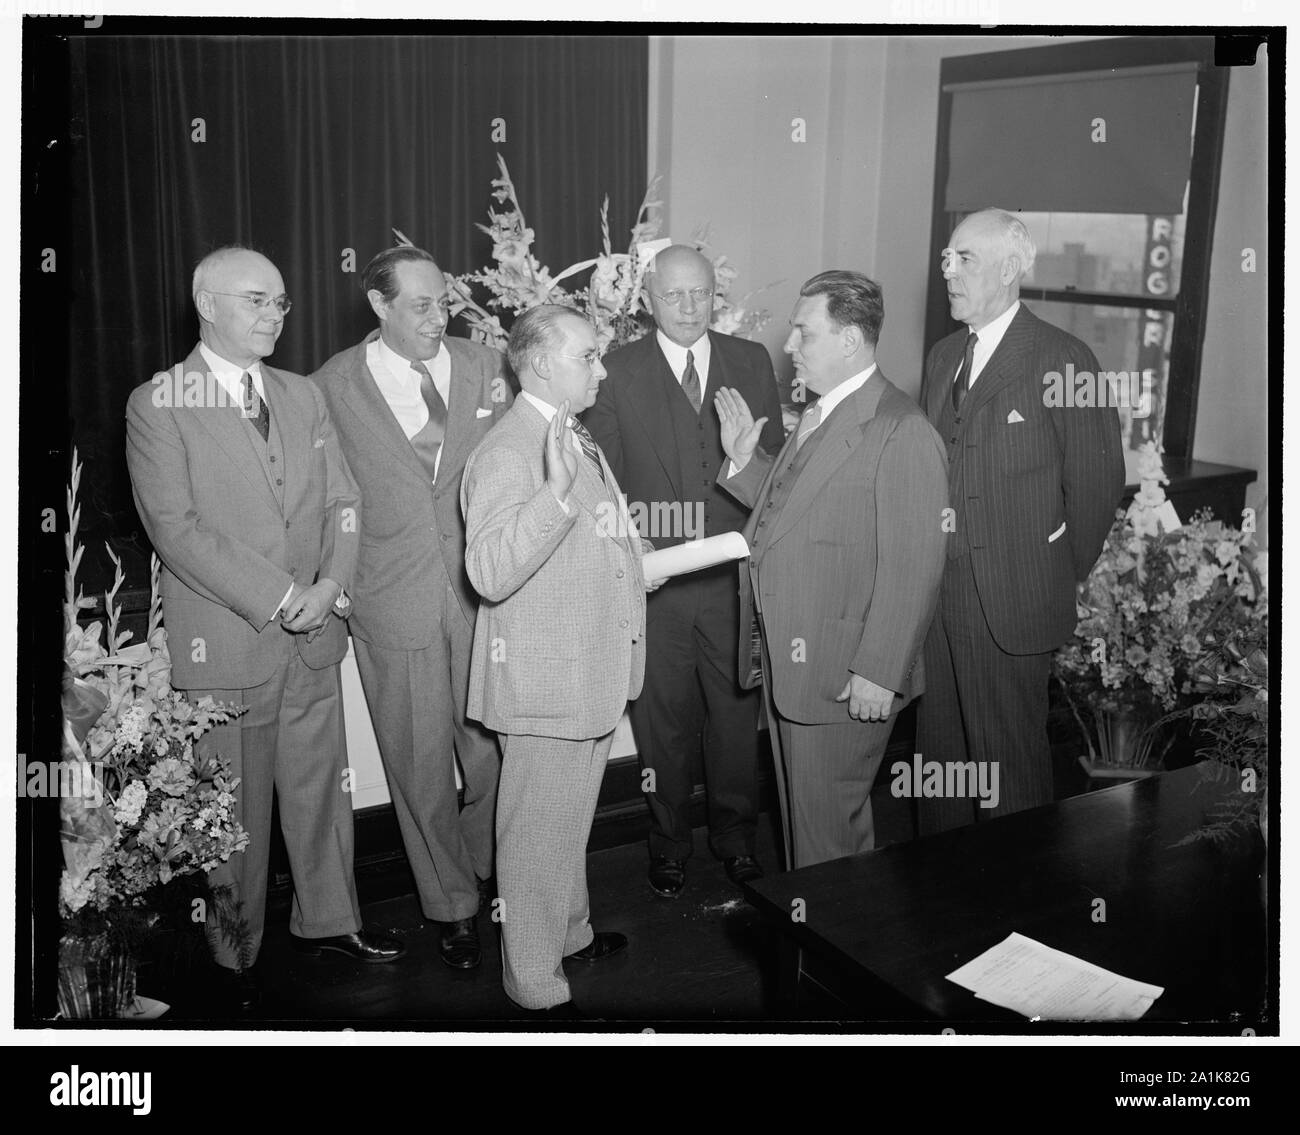 New S.E.C. Commissioner takes oath. Washington, D.C., May 18. Leon Henderson, whose nomination as a member of the Securities and Exchange Commission was recently approved by the Senate, was sworn in and assumed the post today. Left to right: Commissioner Edward C. Eicher, Commissioner Jerome Frank, Francis P. Brassor, Secretary of the Commission who administered the oath, Commissioner George C. Mathews, Leon Henderson, and Commissioner Robert E. Healy Stock Photo